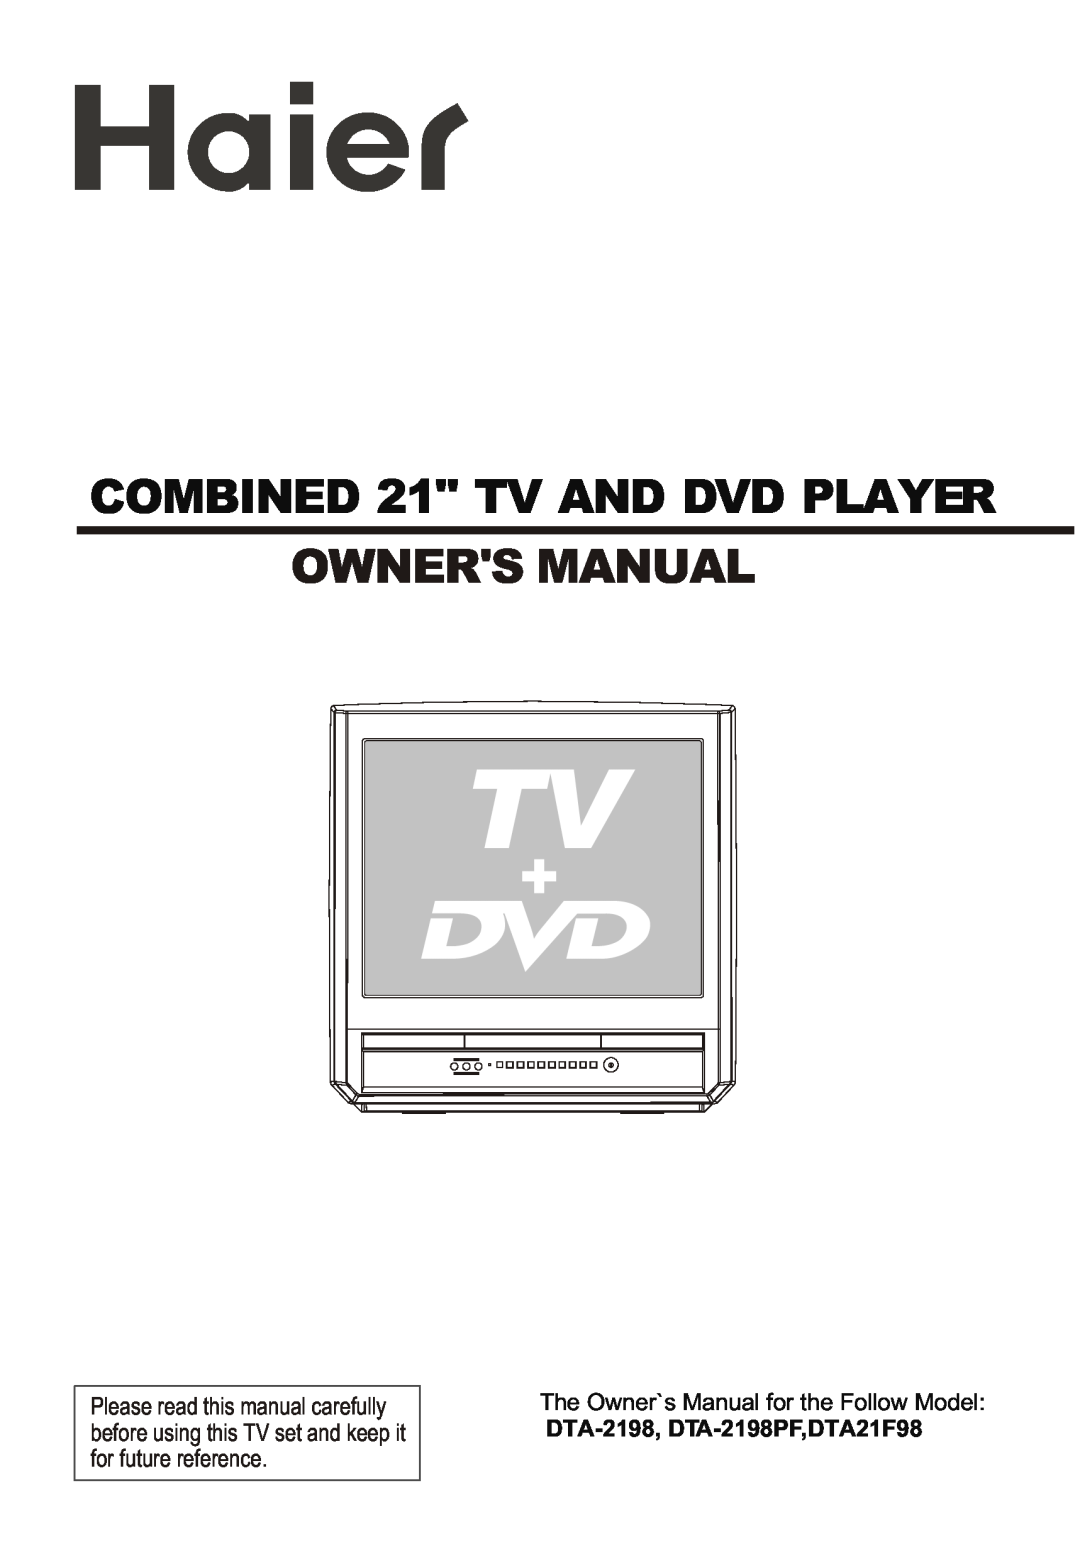 Haier owner manual COMBINED 21 TV AND DVD PLAYER, Owners Manual, DTA-2198, DTA-2198PF,DTA21F98 